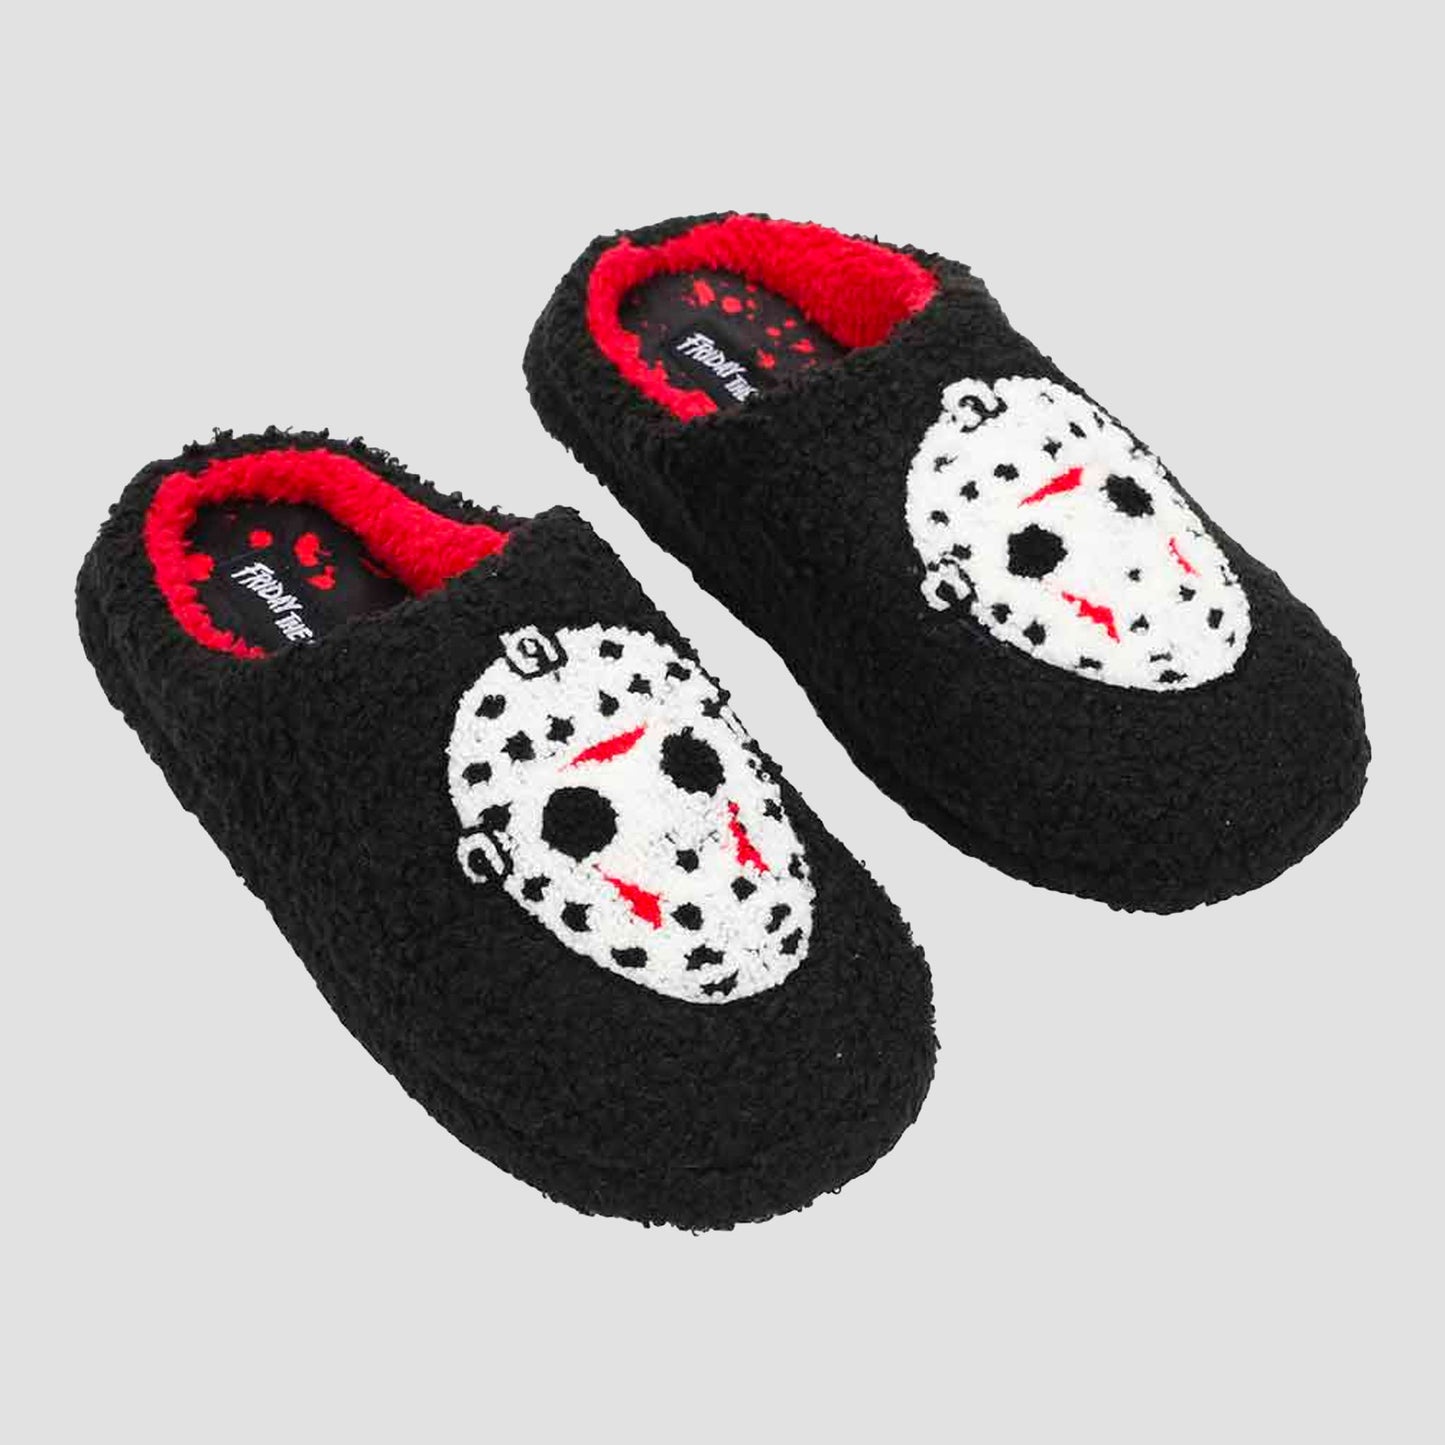 Jason (Friday the 13th) Slippers